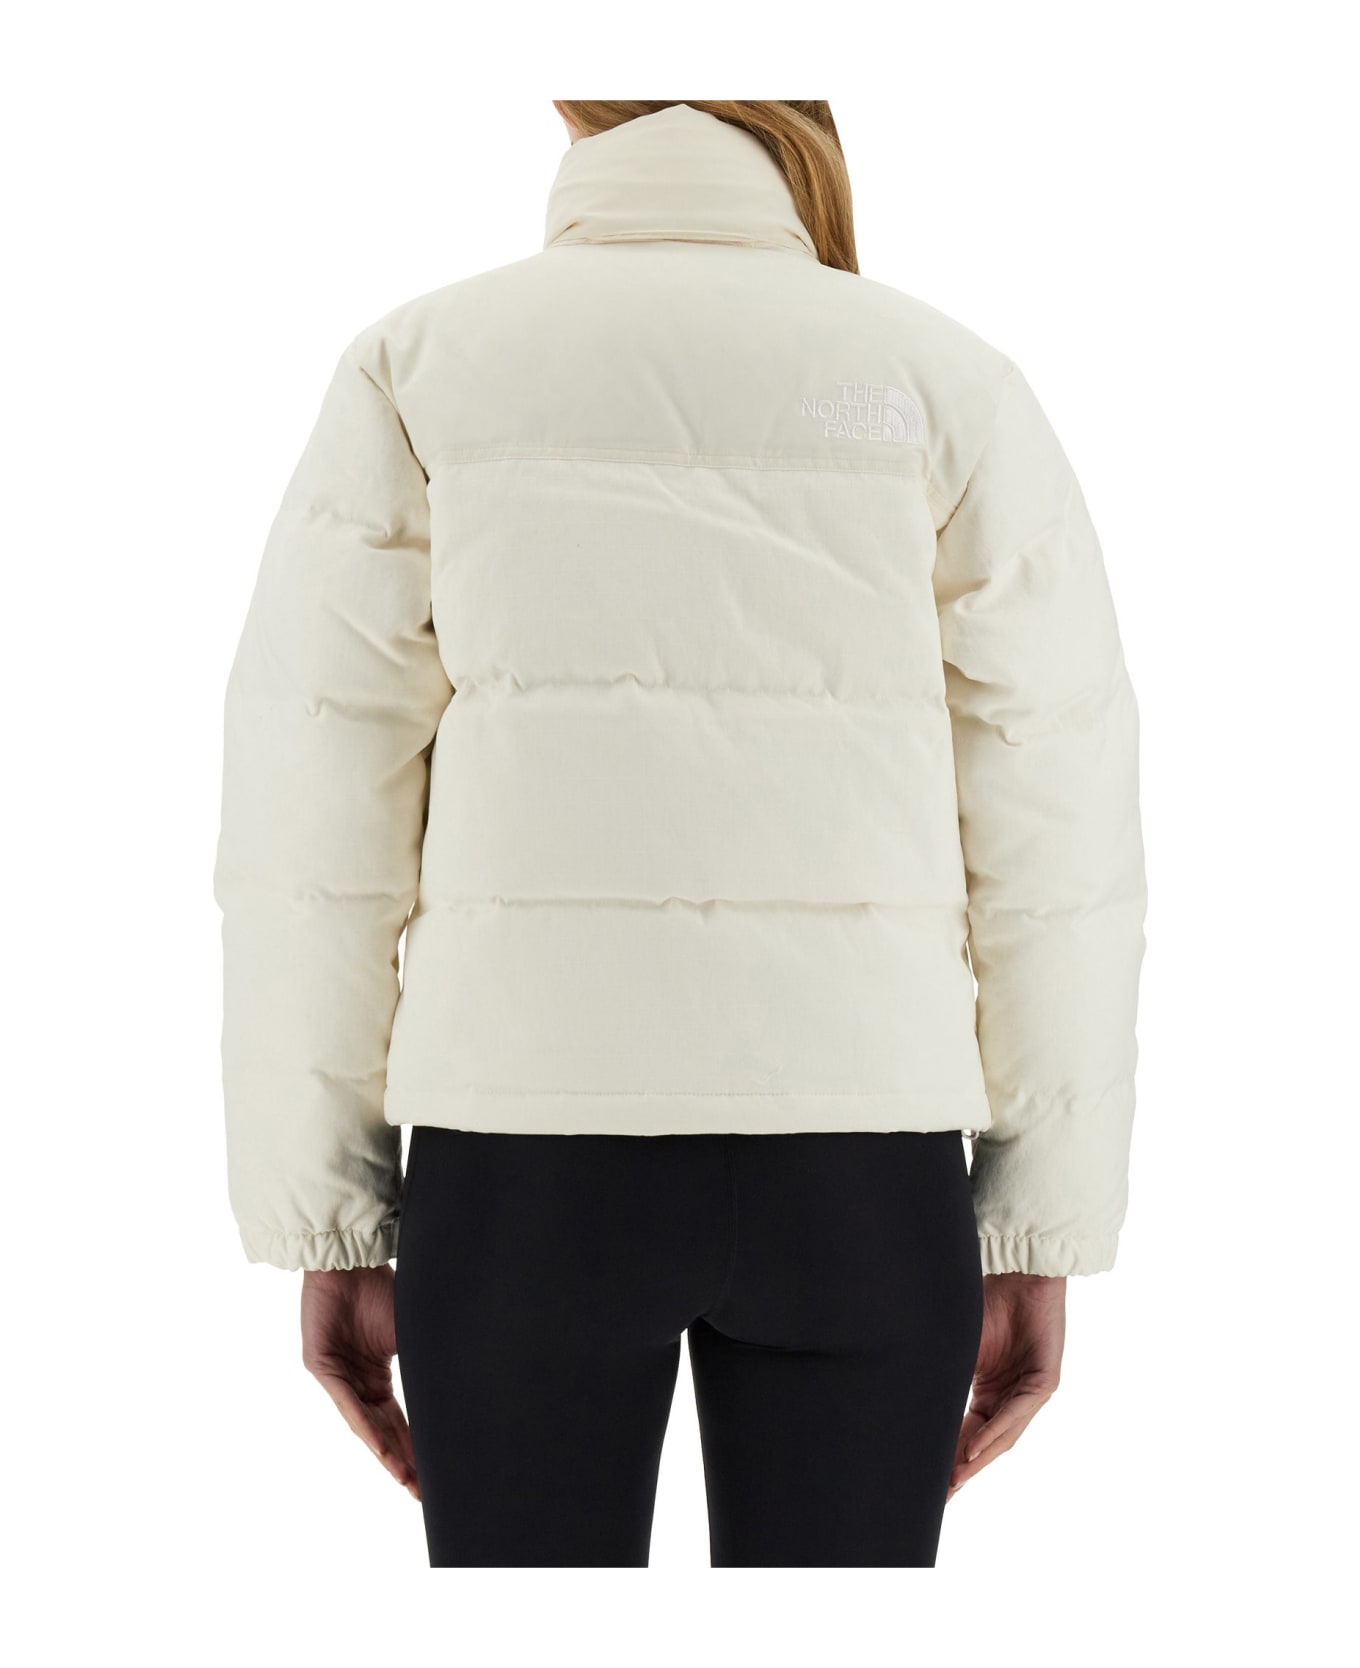 The North Face Jacket With Logo - Bianco